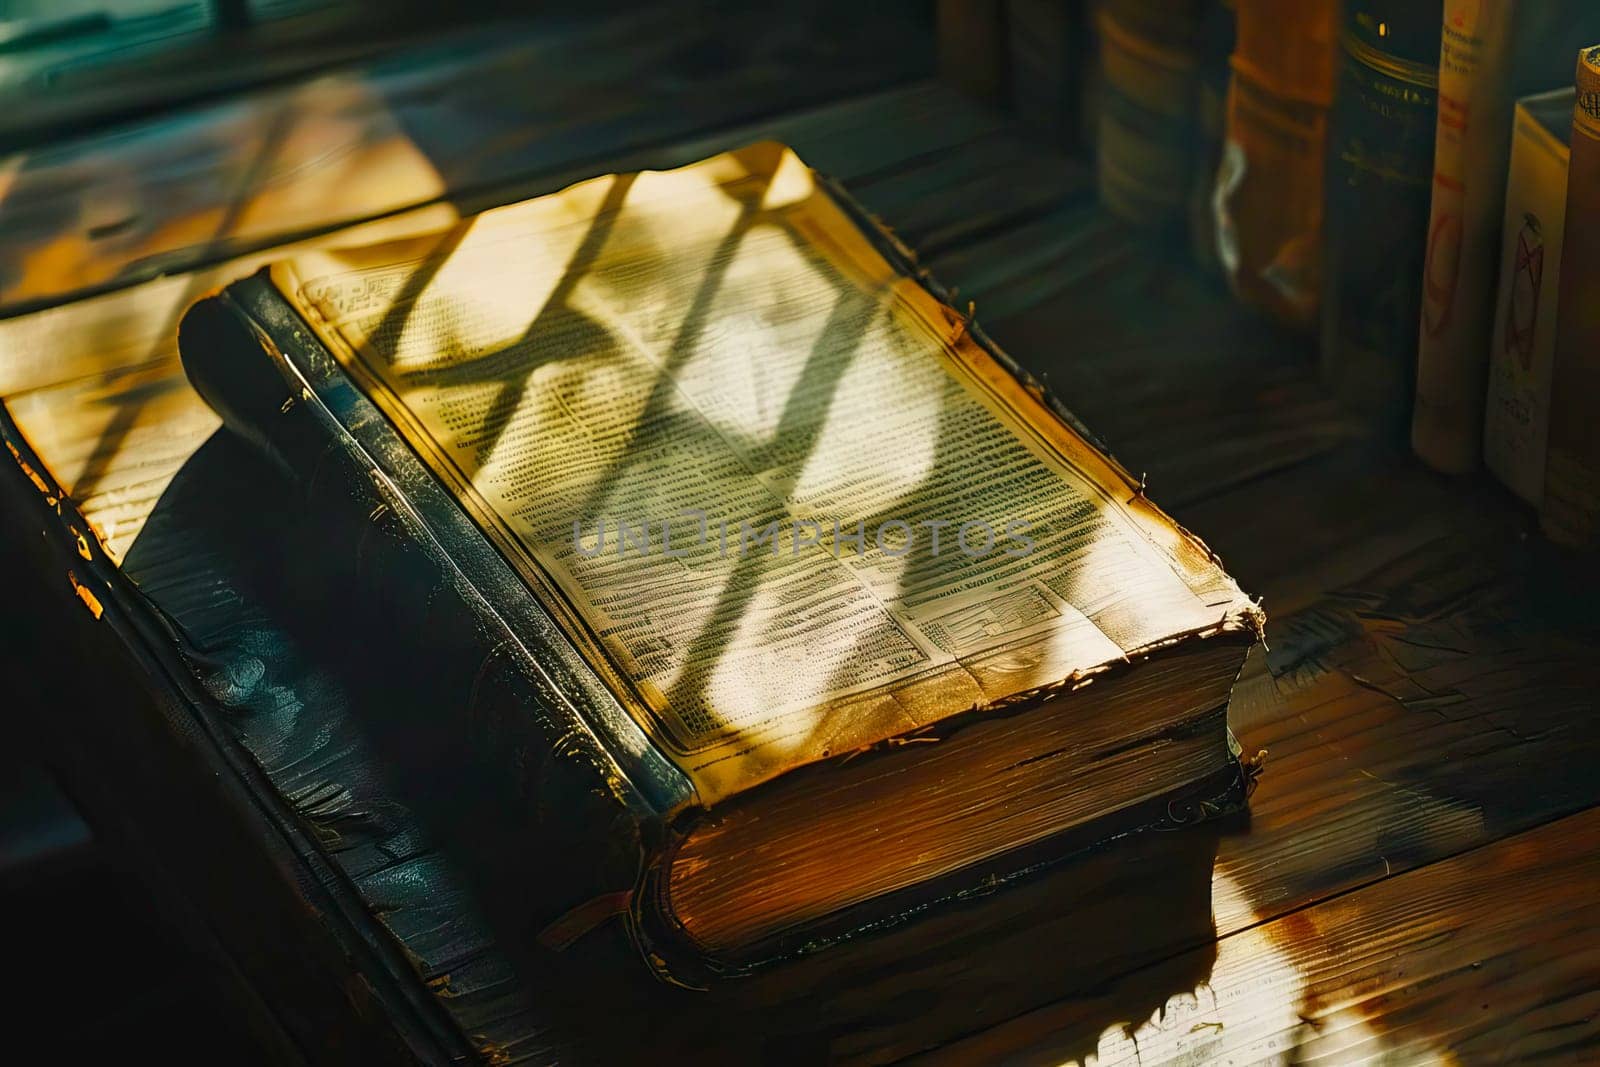 A holy Bible rests on a wooden table in a simple setting.